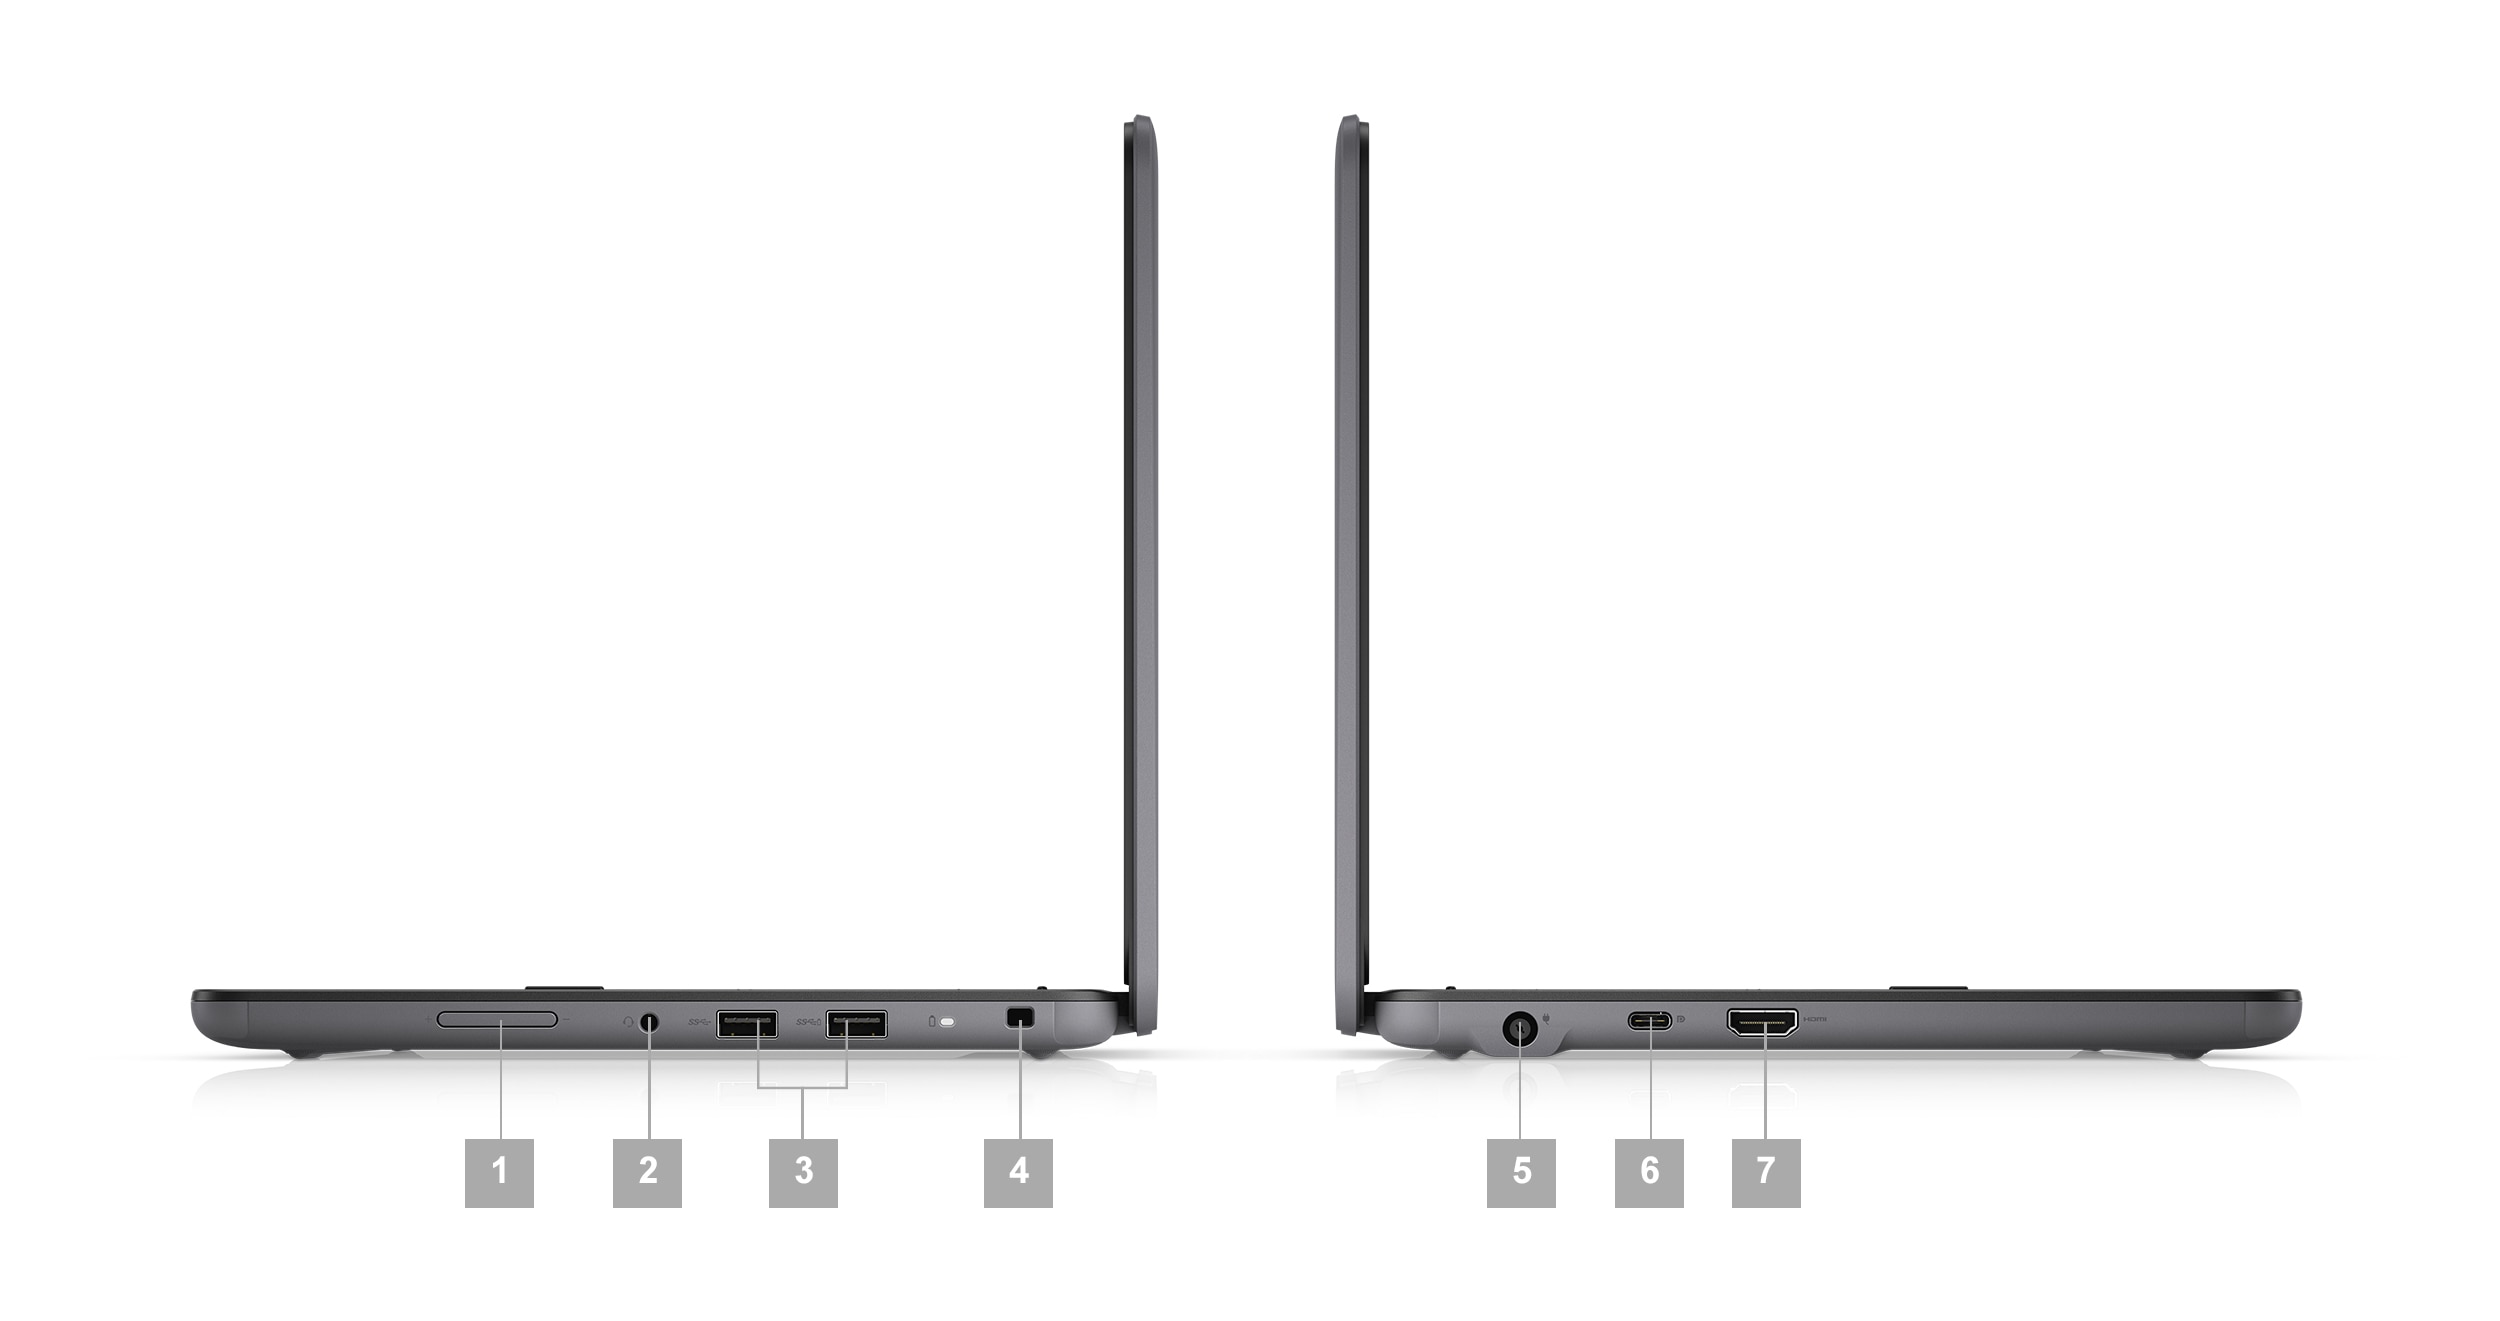 Dell Latitude 11 3140 2-in-1 laptops placed sideways with numbers from 1 to 7 signaling the product ports and slots.